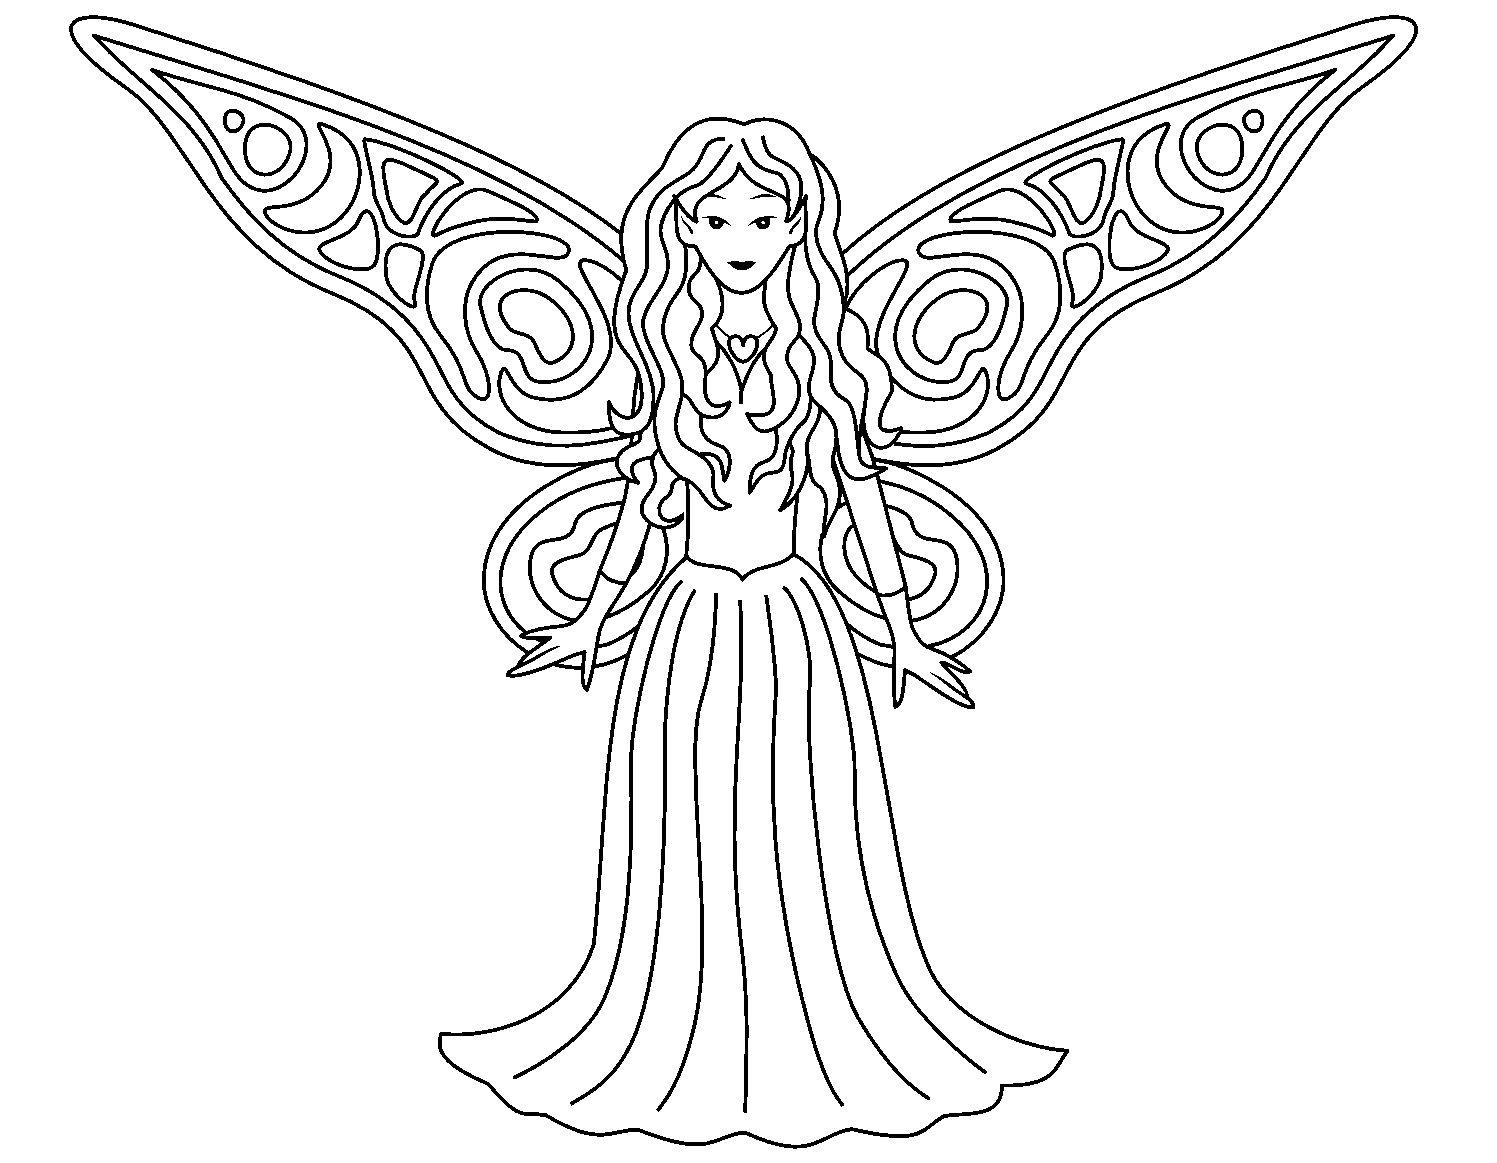 Fairy Colouring Pages Printable Free - High Quality Coloring Pages